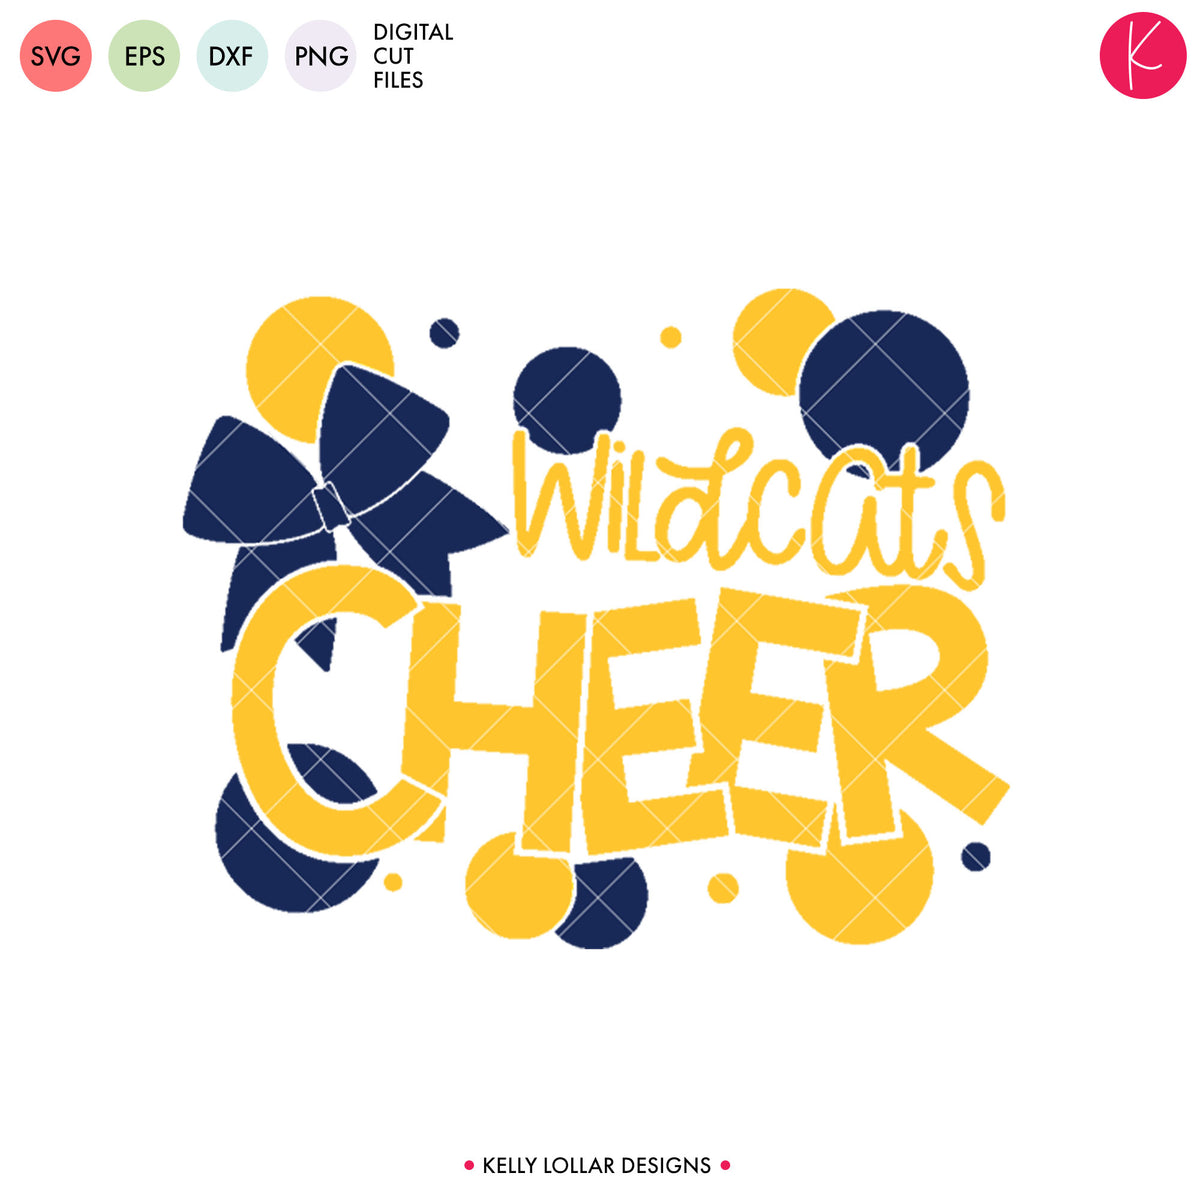 Wildcats Cheer Bundle | SVG DXF EPS PNG Cut Files